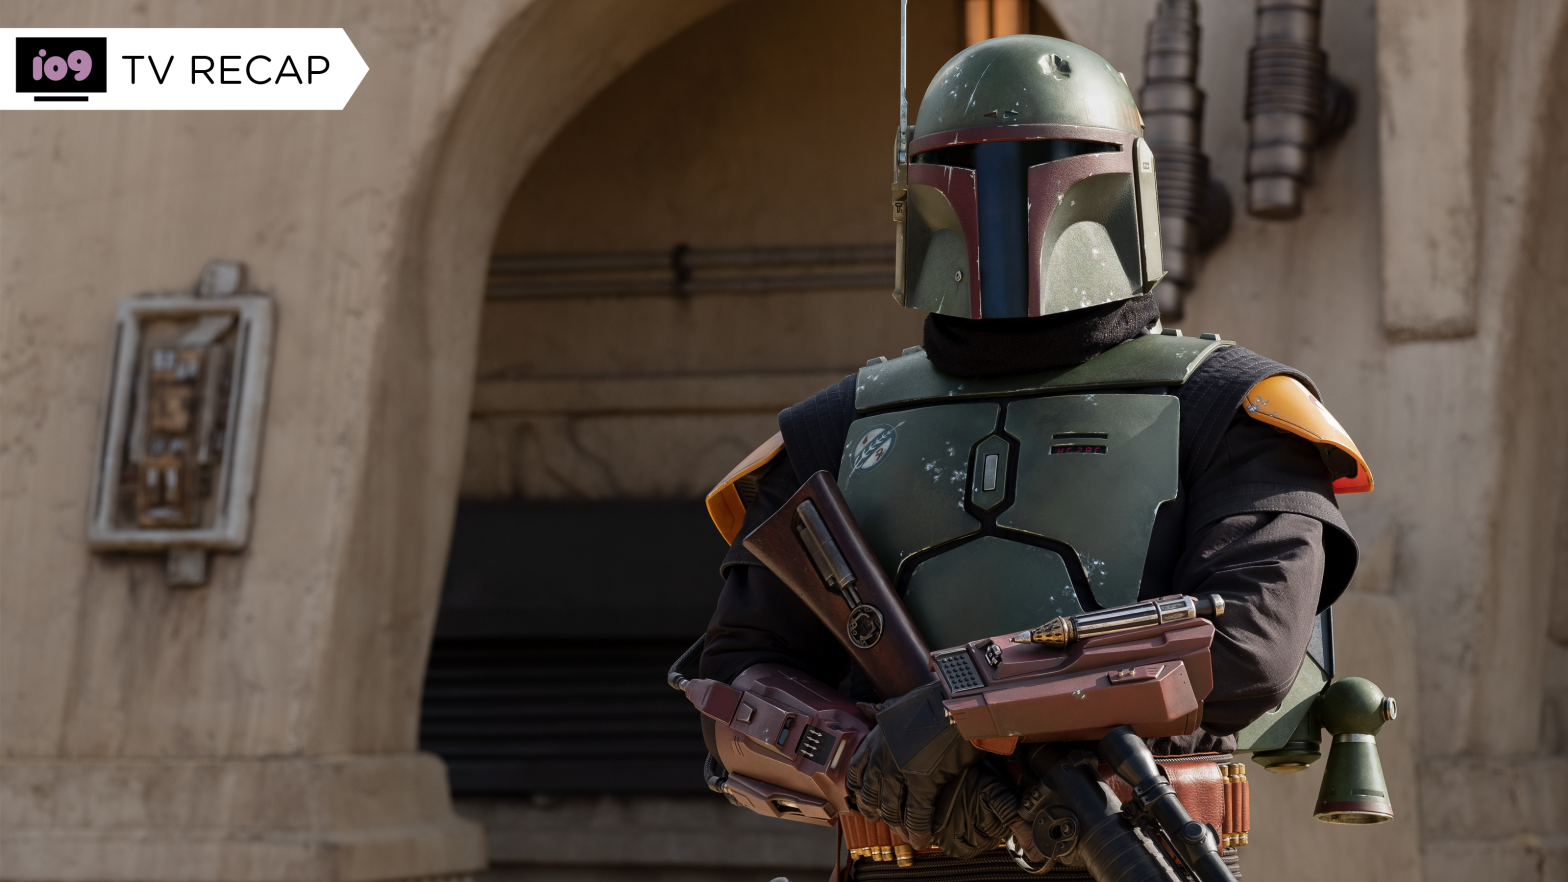 The Book of Boba Fett is ready to dive a little deeper into how its hero came to be the reborn man we met in The Mandalorian. (Image: Lucasfilm)